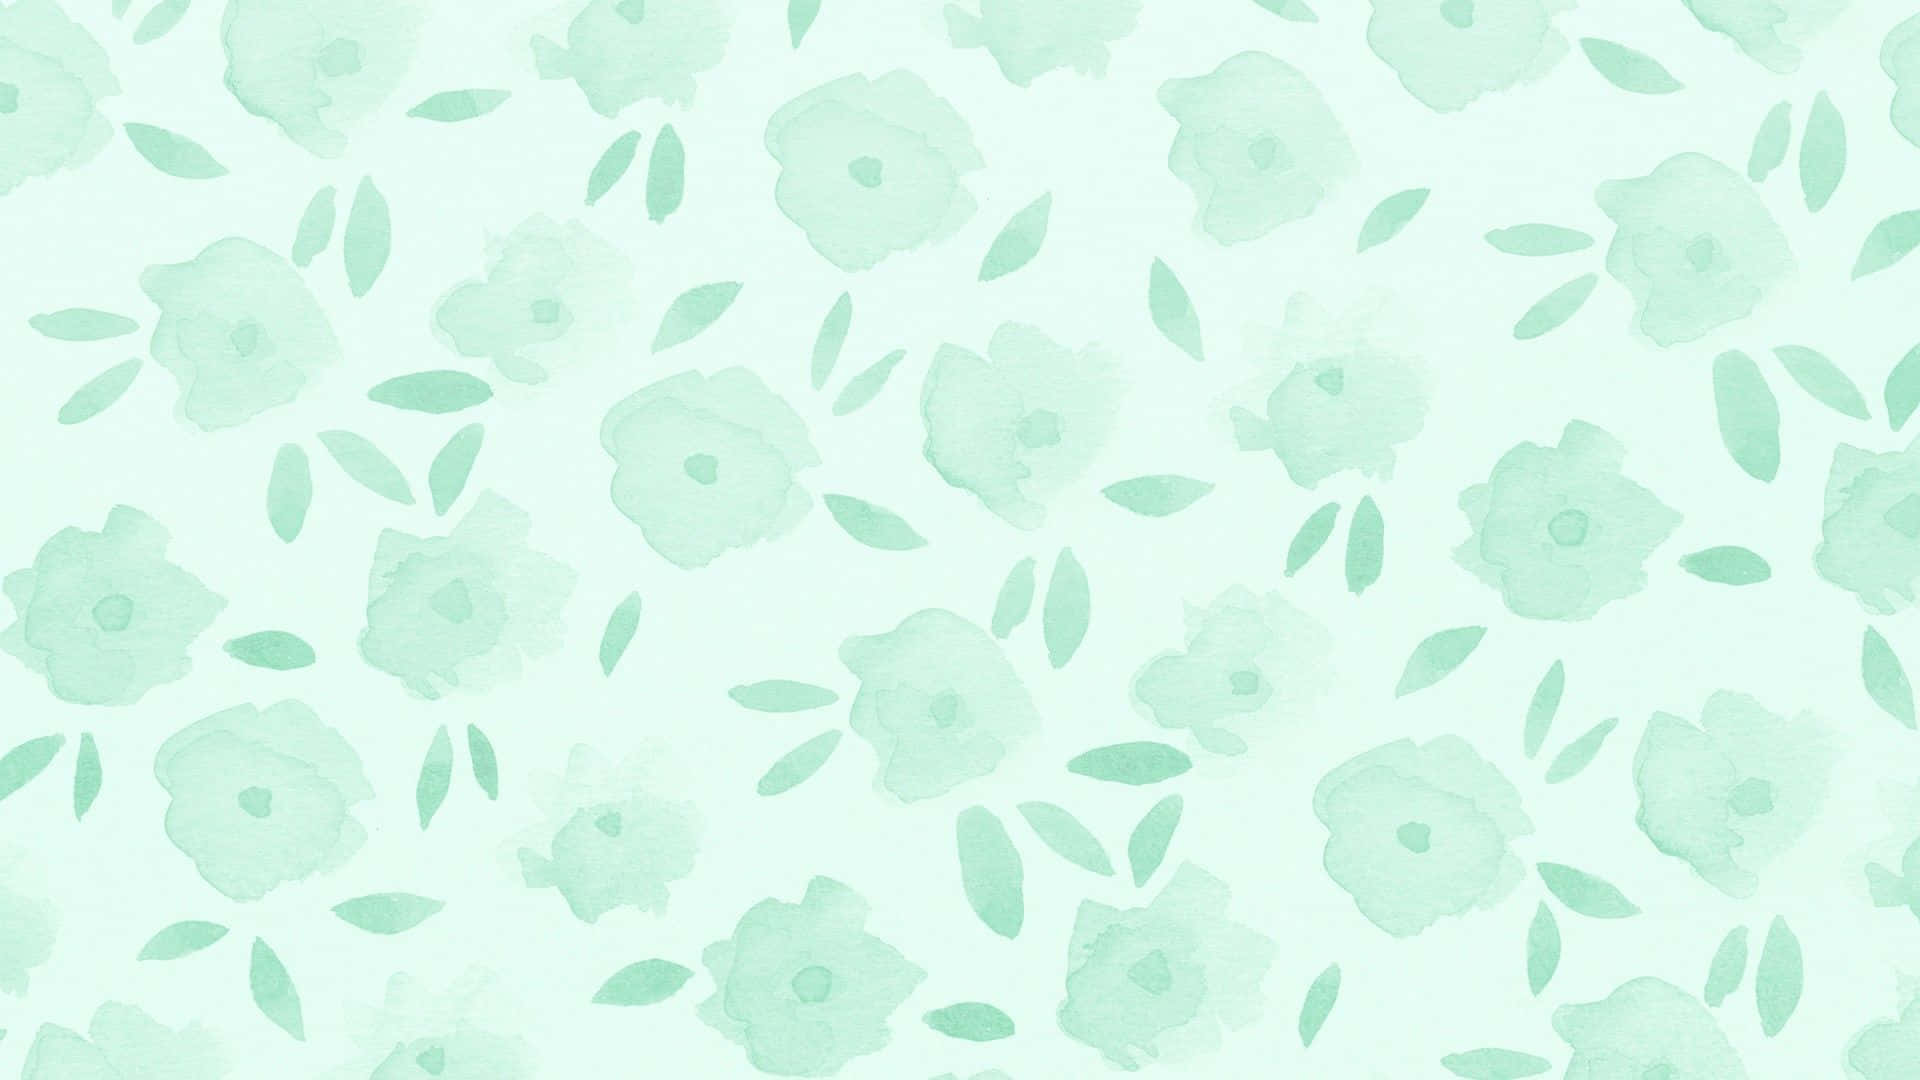 A pattern of mint green flowers on a white background - Sage green, mint green